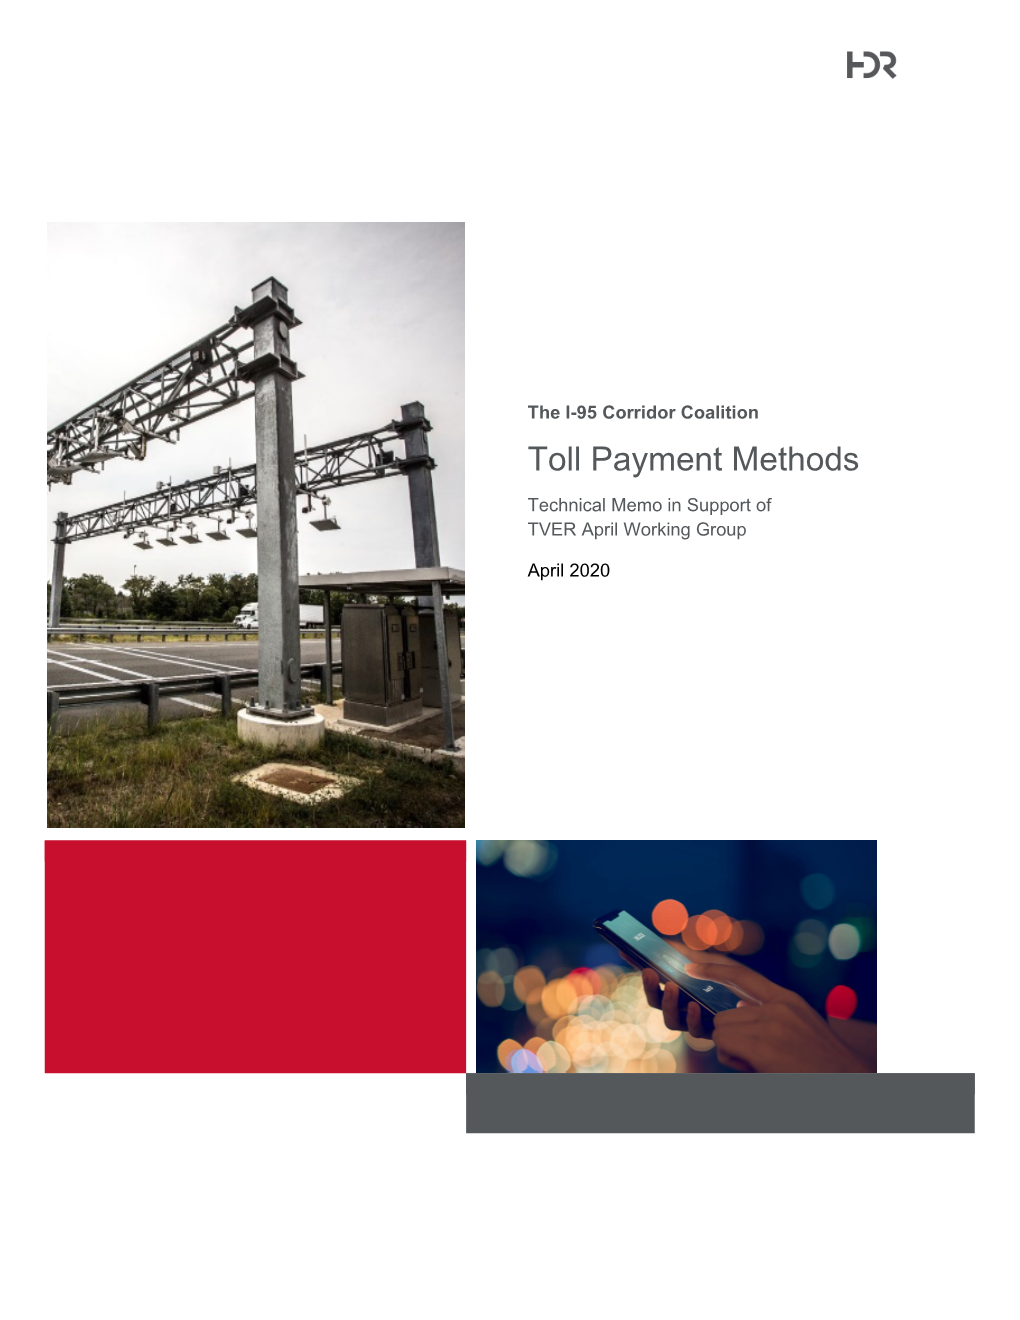 Toll Payment Methods Technical Memo in Support of TVER April Working Group